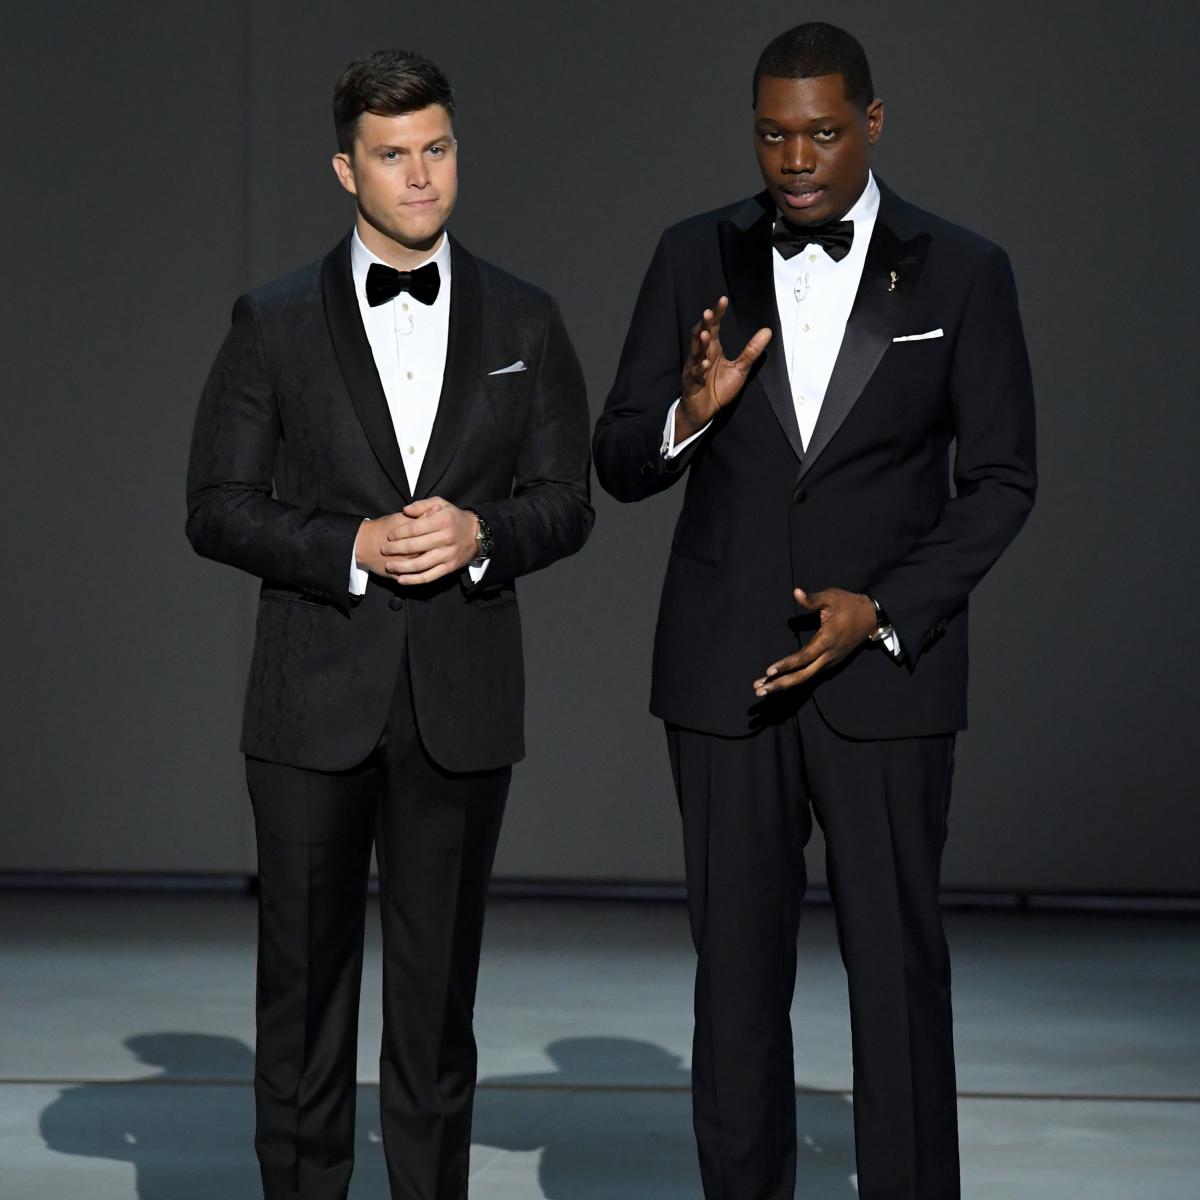 Video: Colin Jost, Michael Che Set for Andre the Giant ...